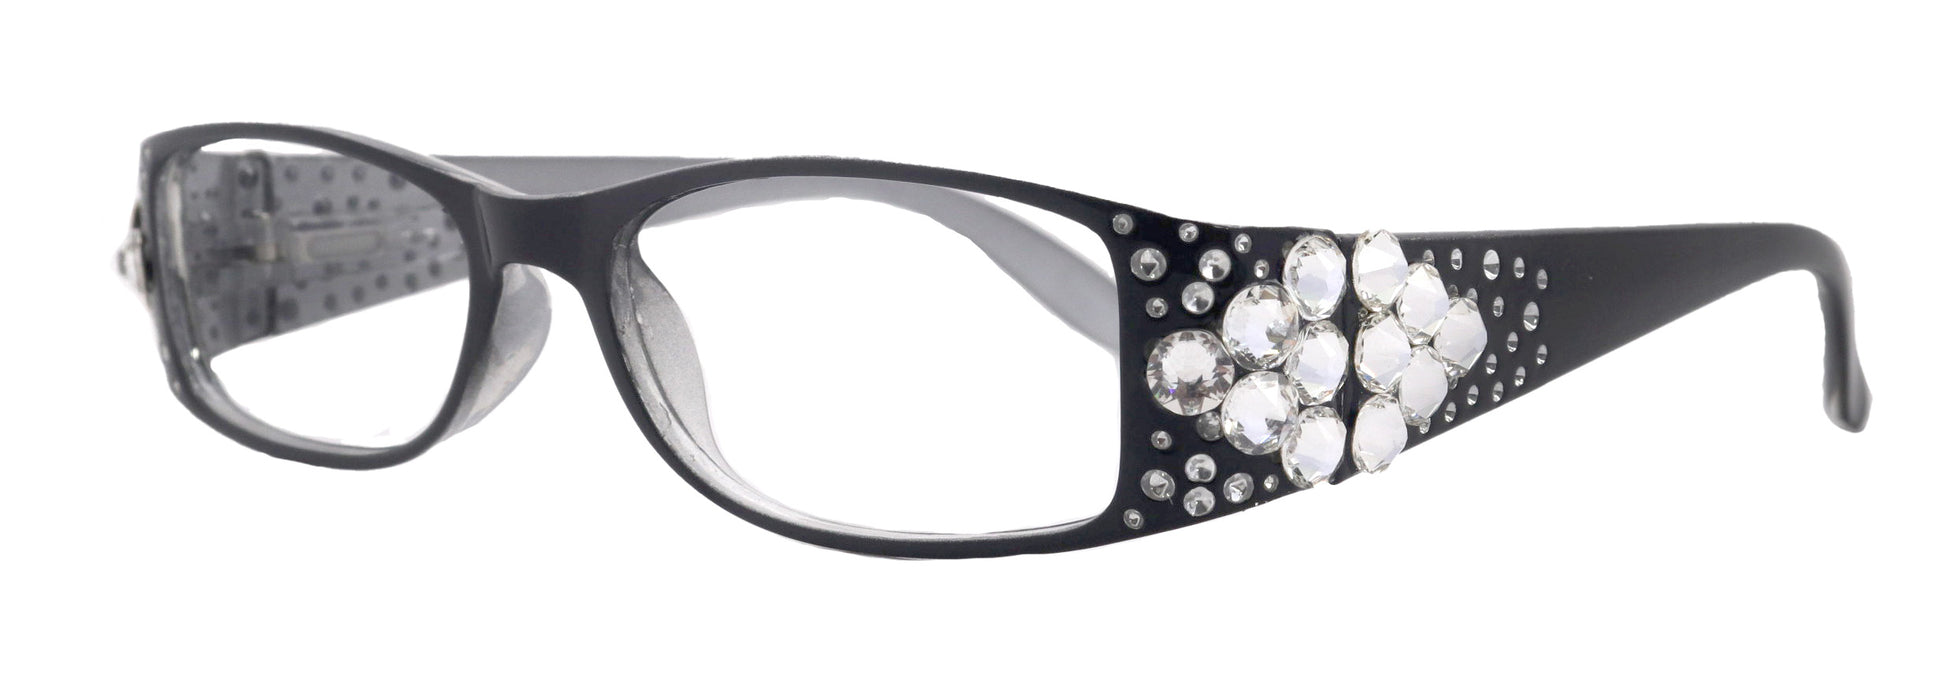 Merkel, The Diamond Crystal Shape, Bling Women Reading Glasses, Adorned w Clear Genuine European Crystals +1.50 to +3. NY Fifth Avenue.